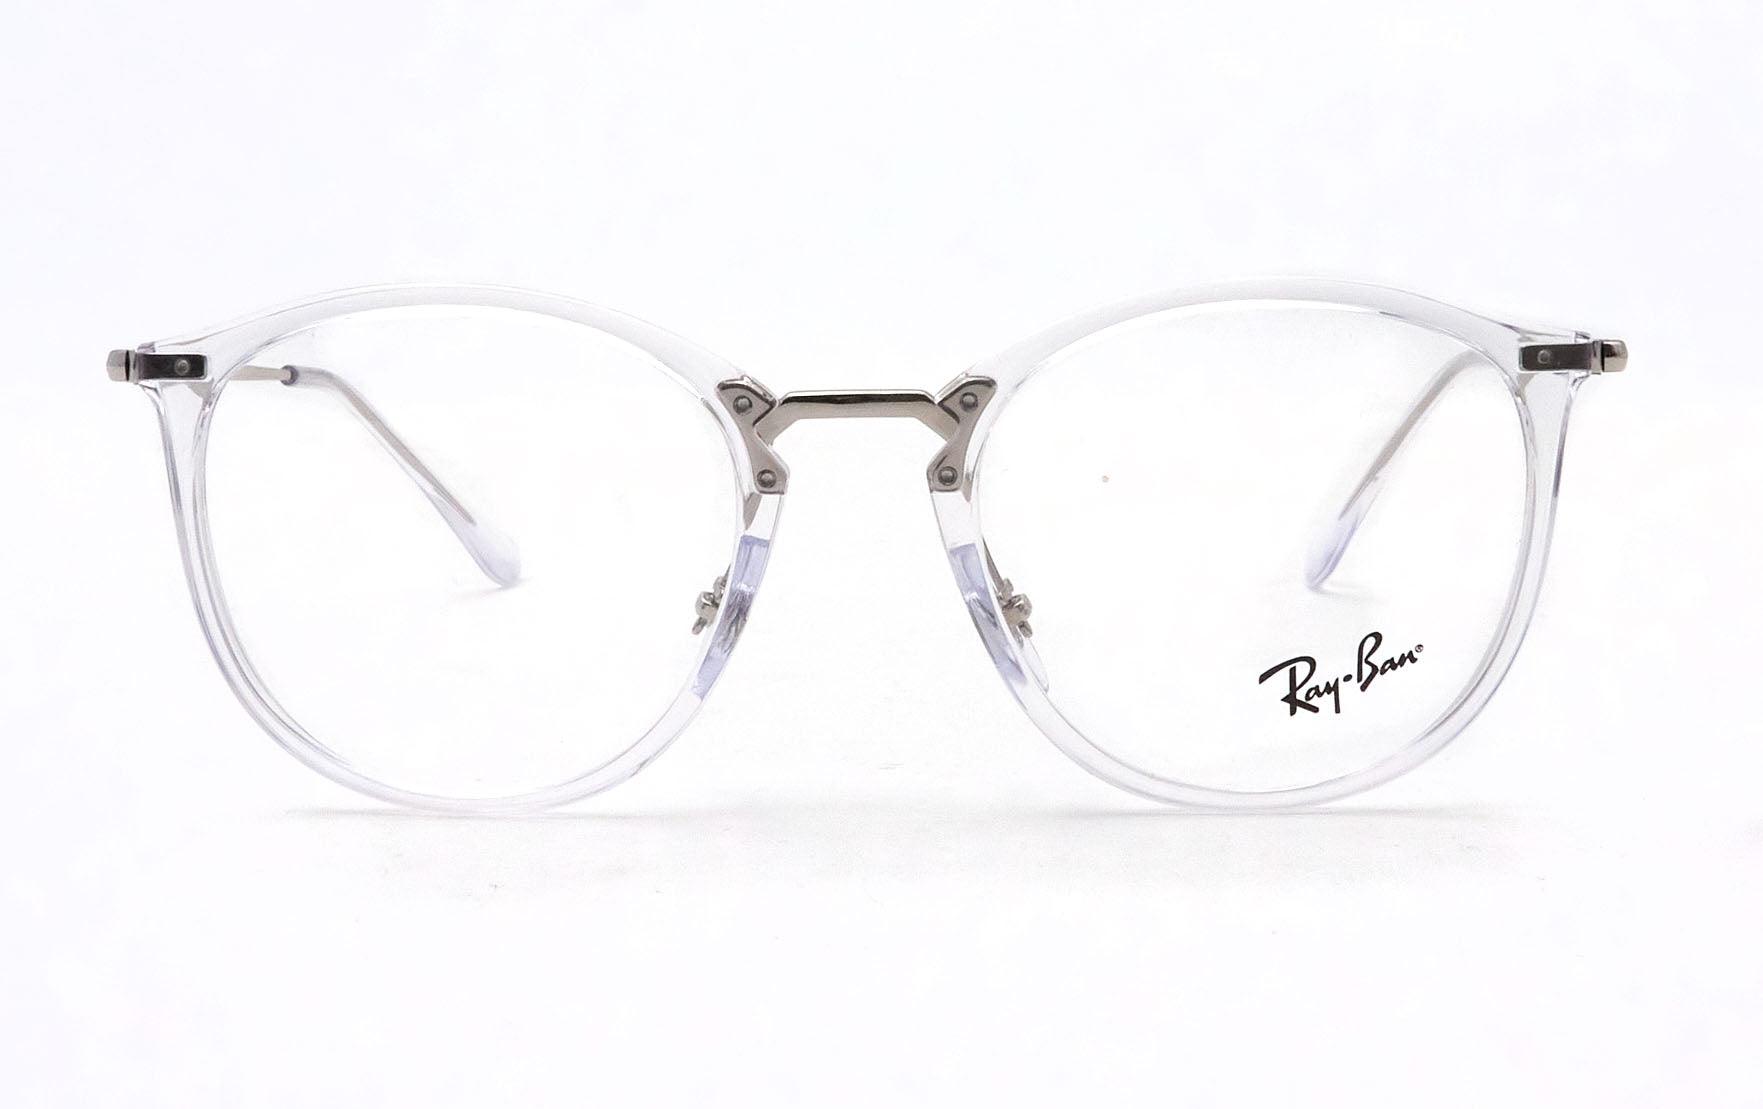 RAY-BAN 7140 2001 - Opticas Lookout